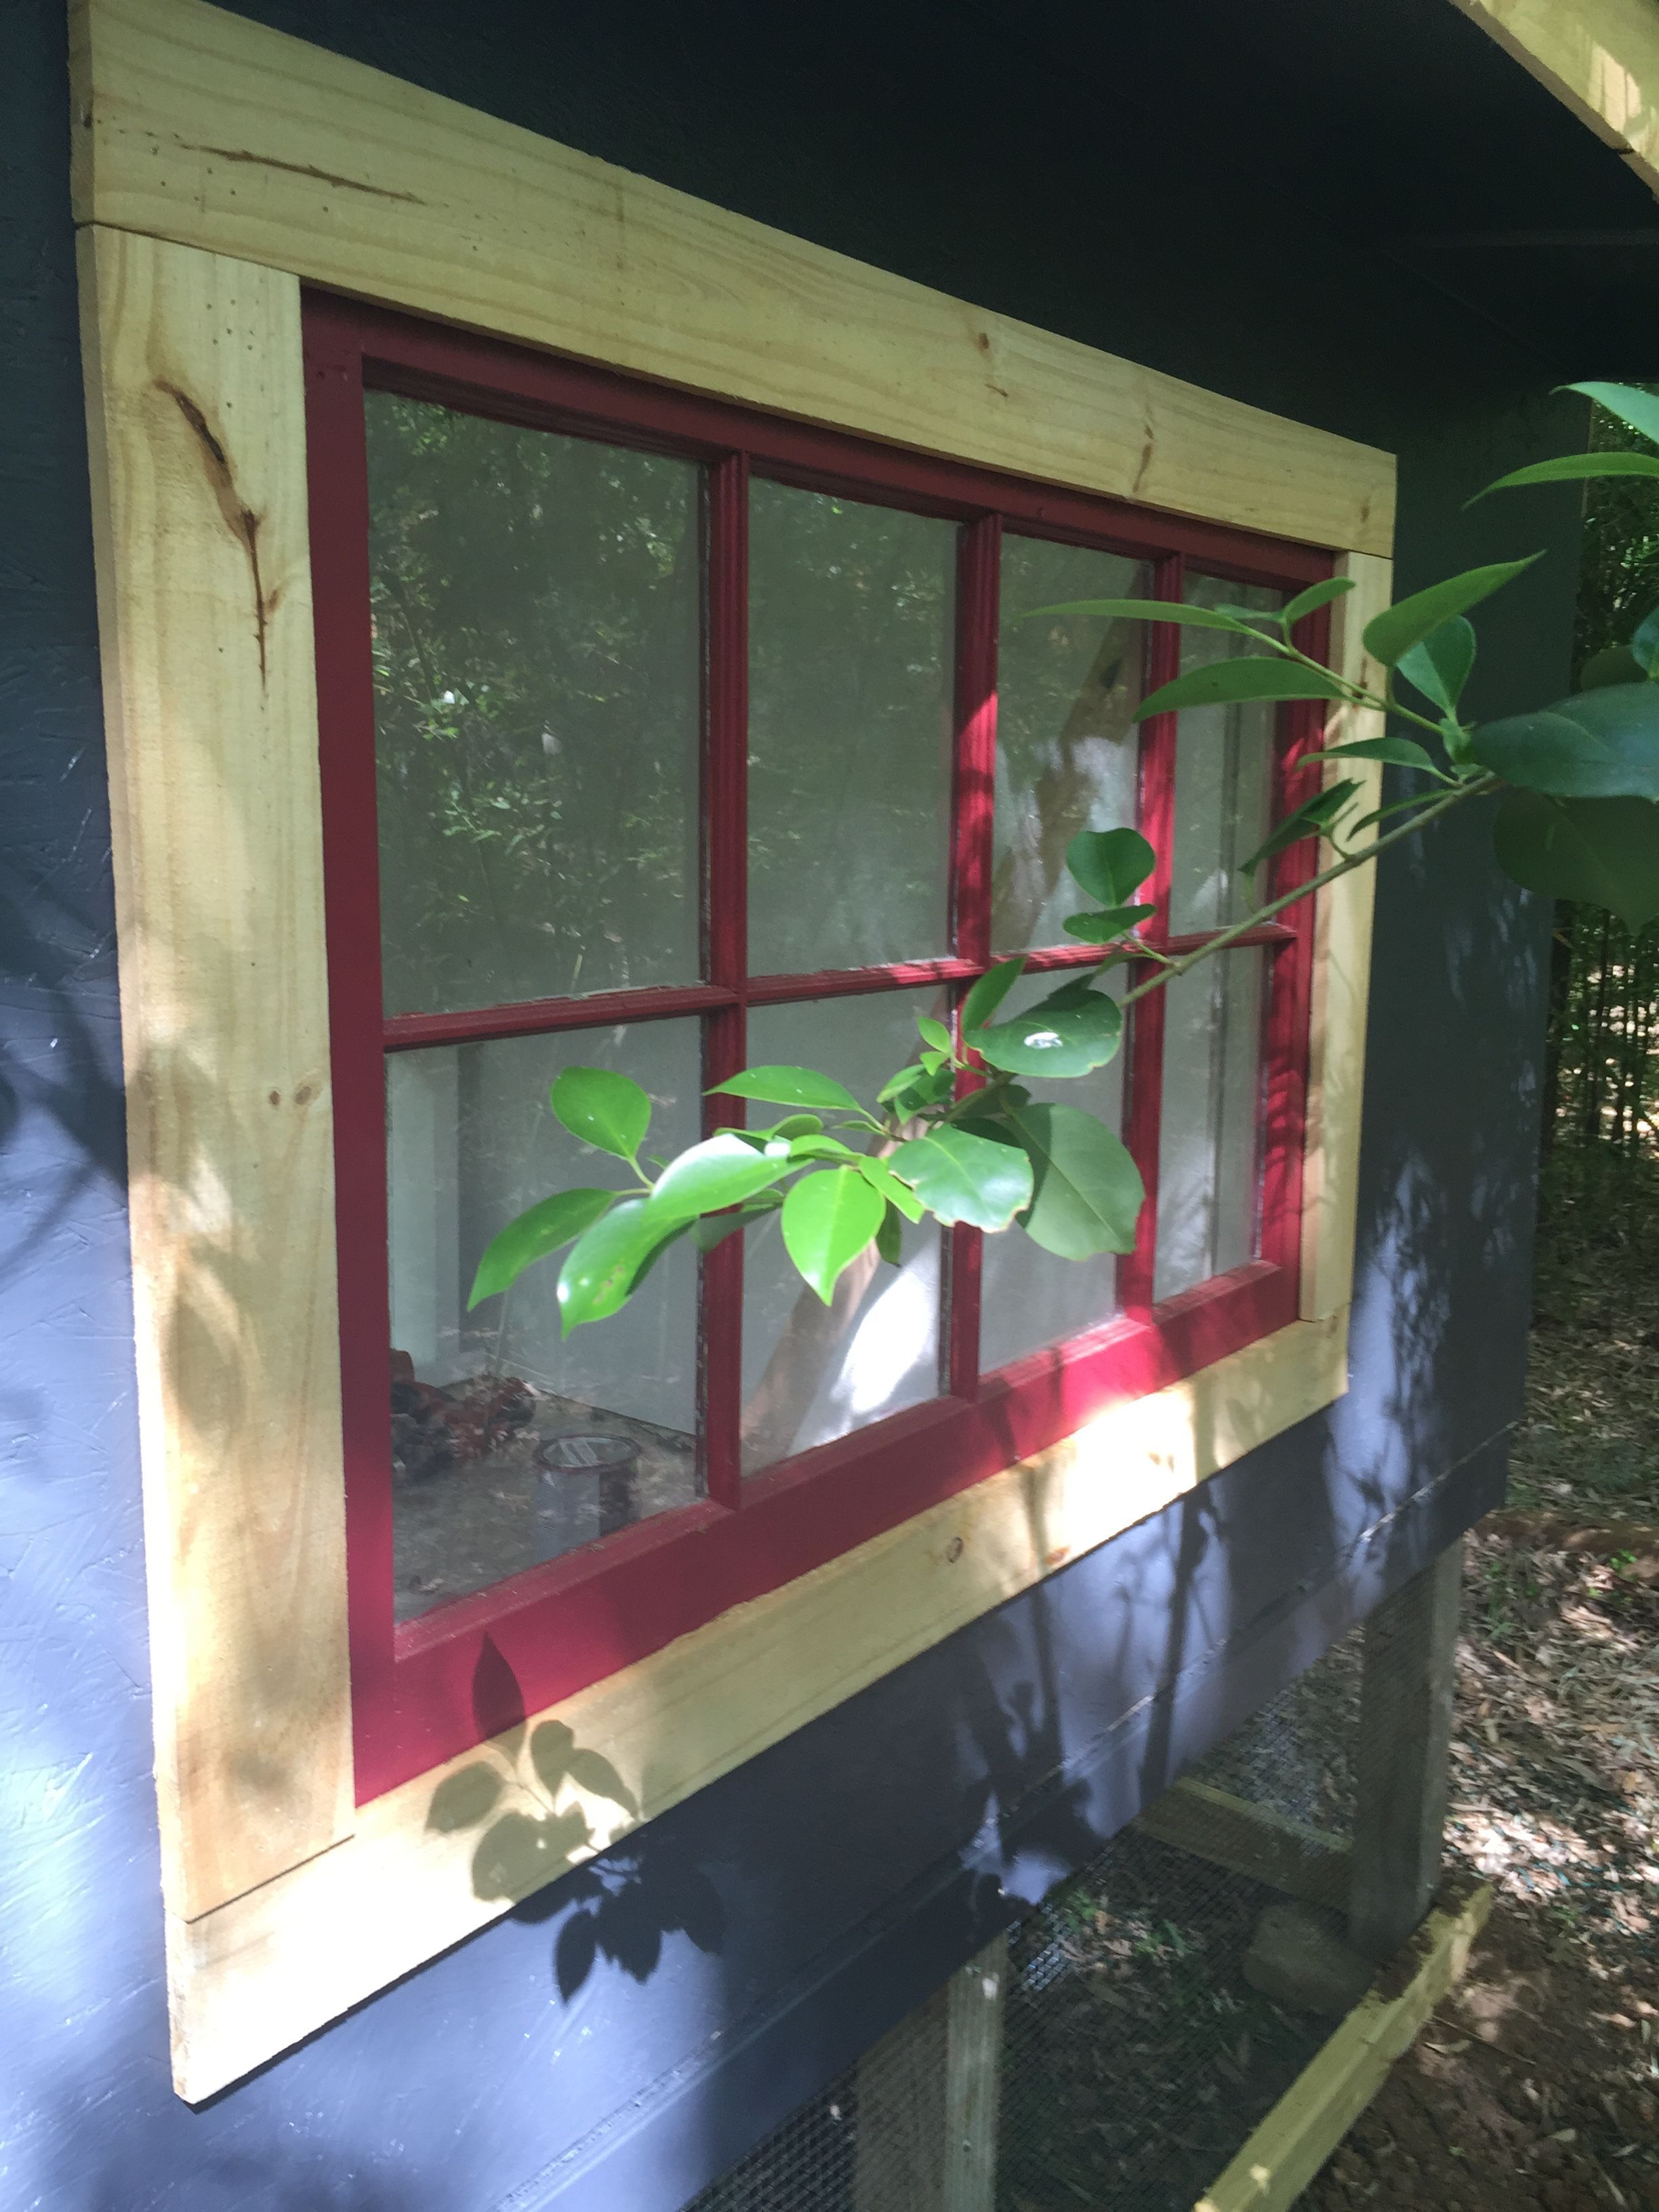 Antique window installed, need to stain the trim